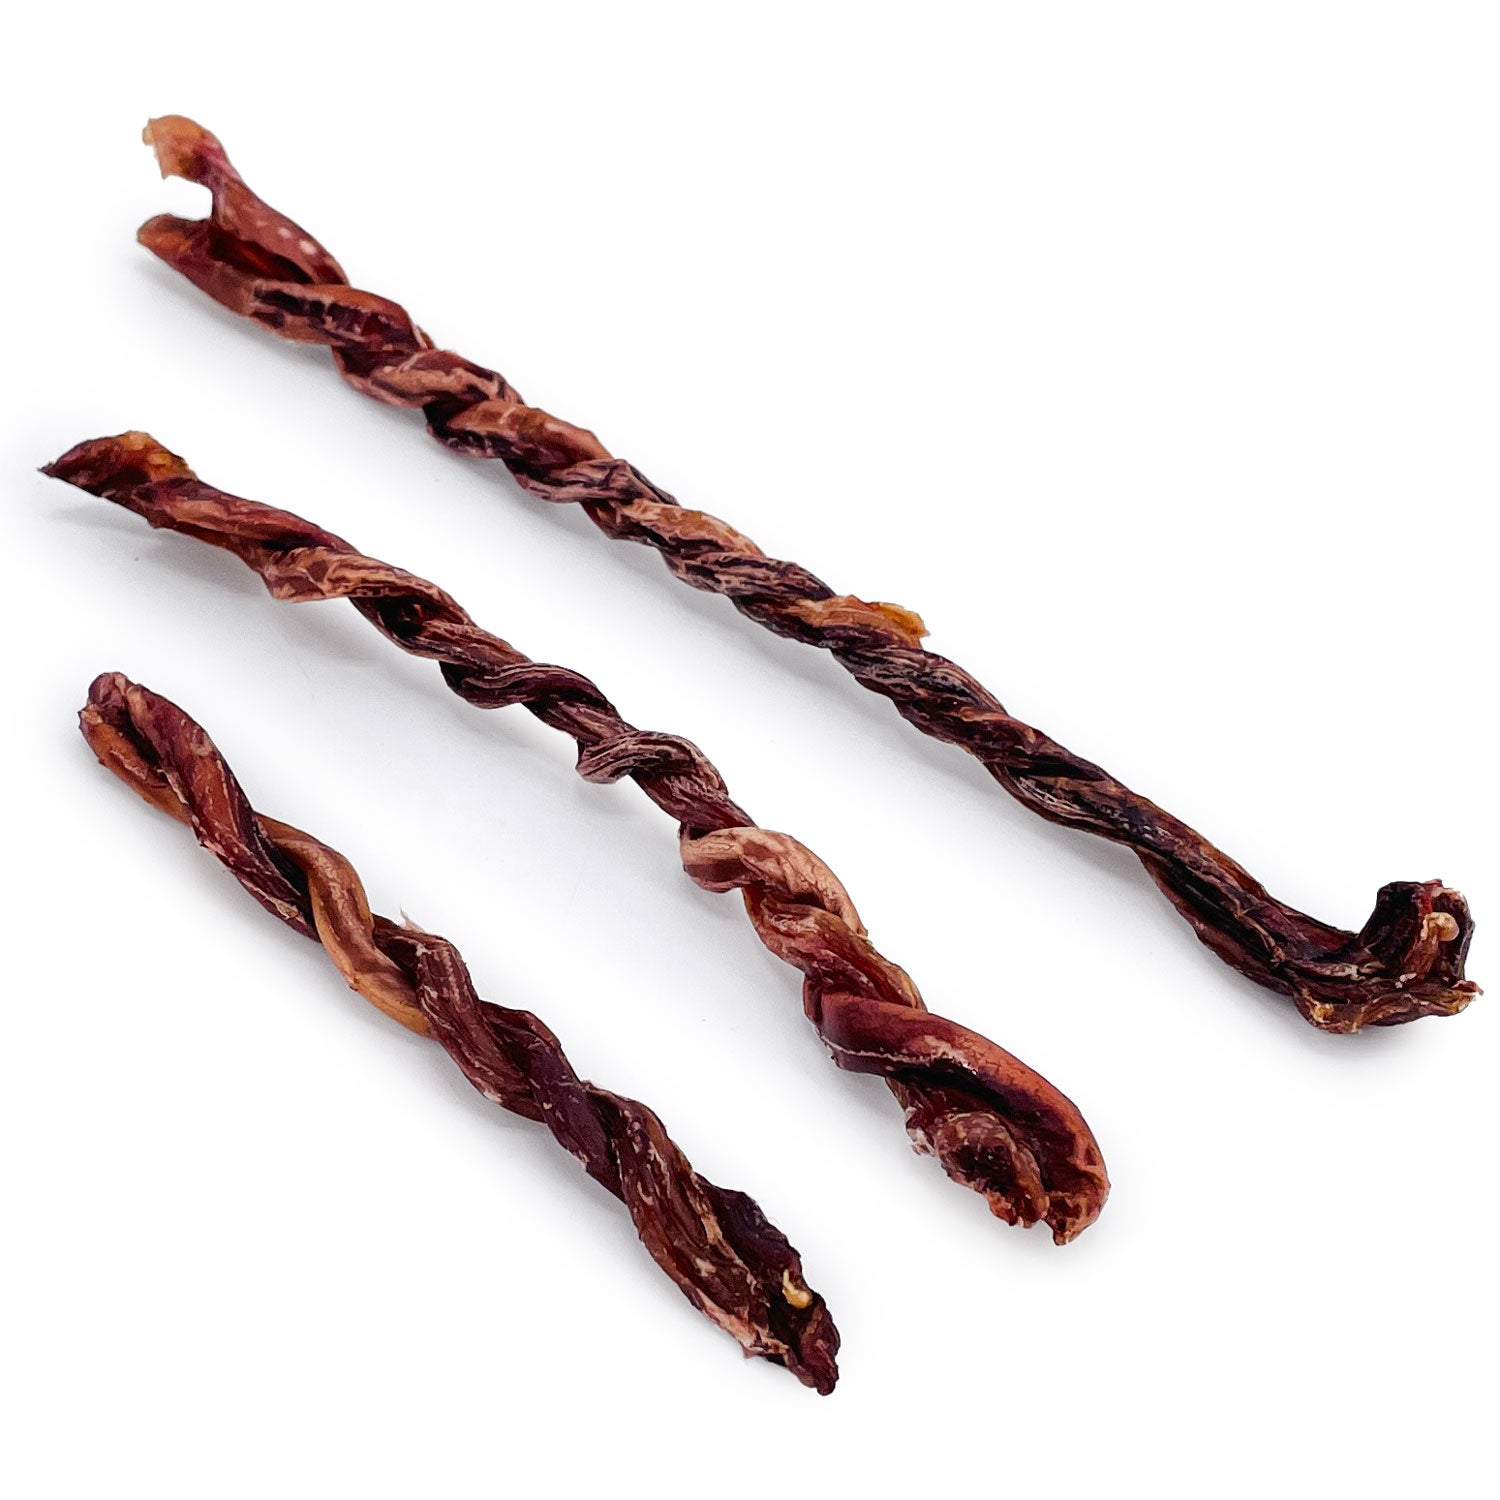 ValueBull USA Pork Pizzle Twists for Dogs, 5-10", 50 ct